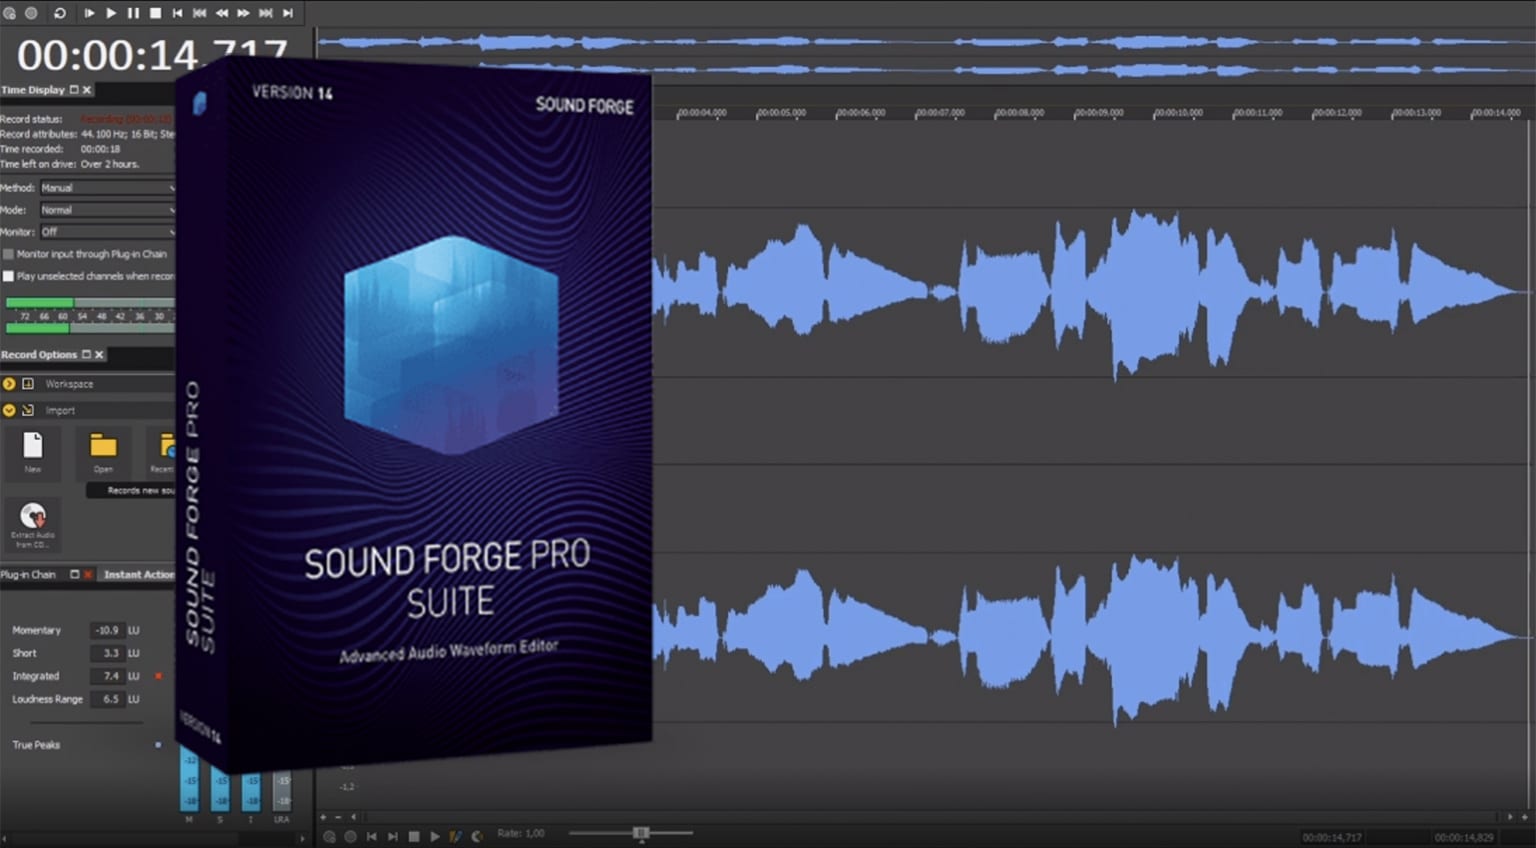 magix sound forge pro 12 for mac